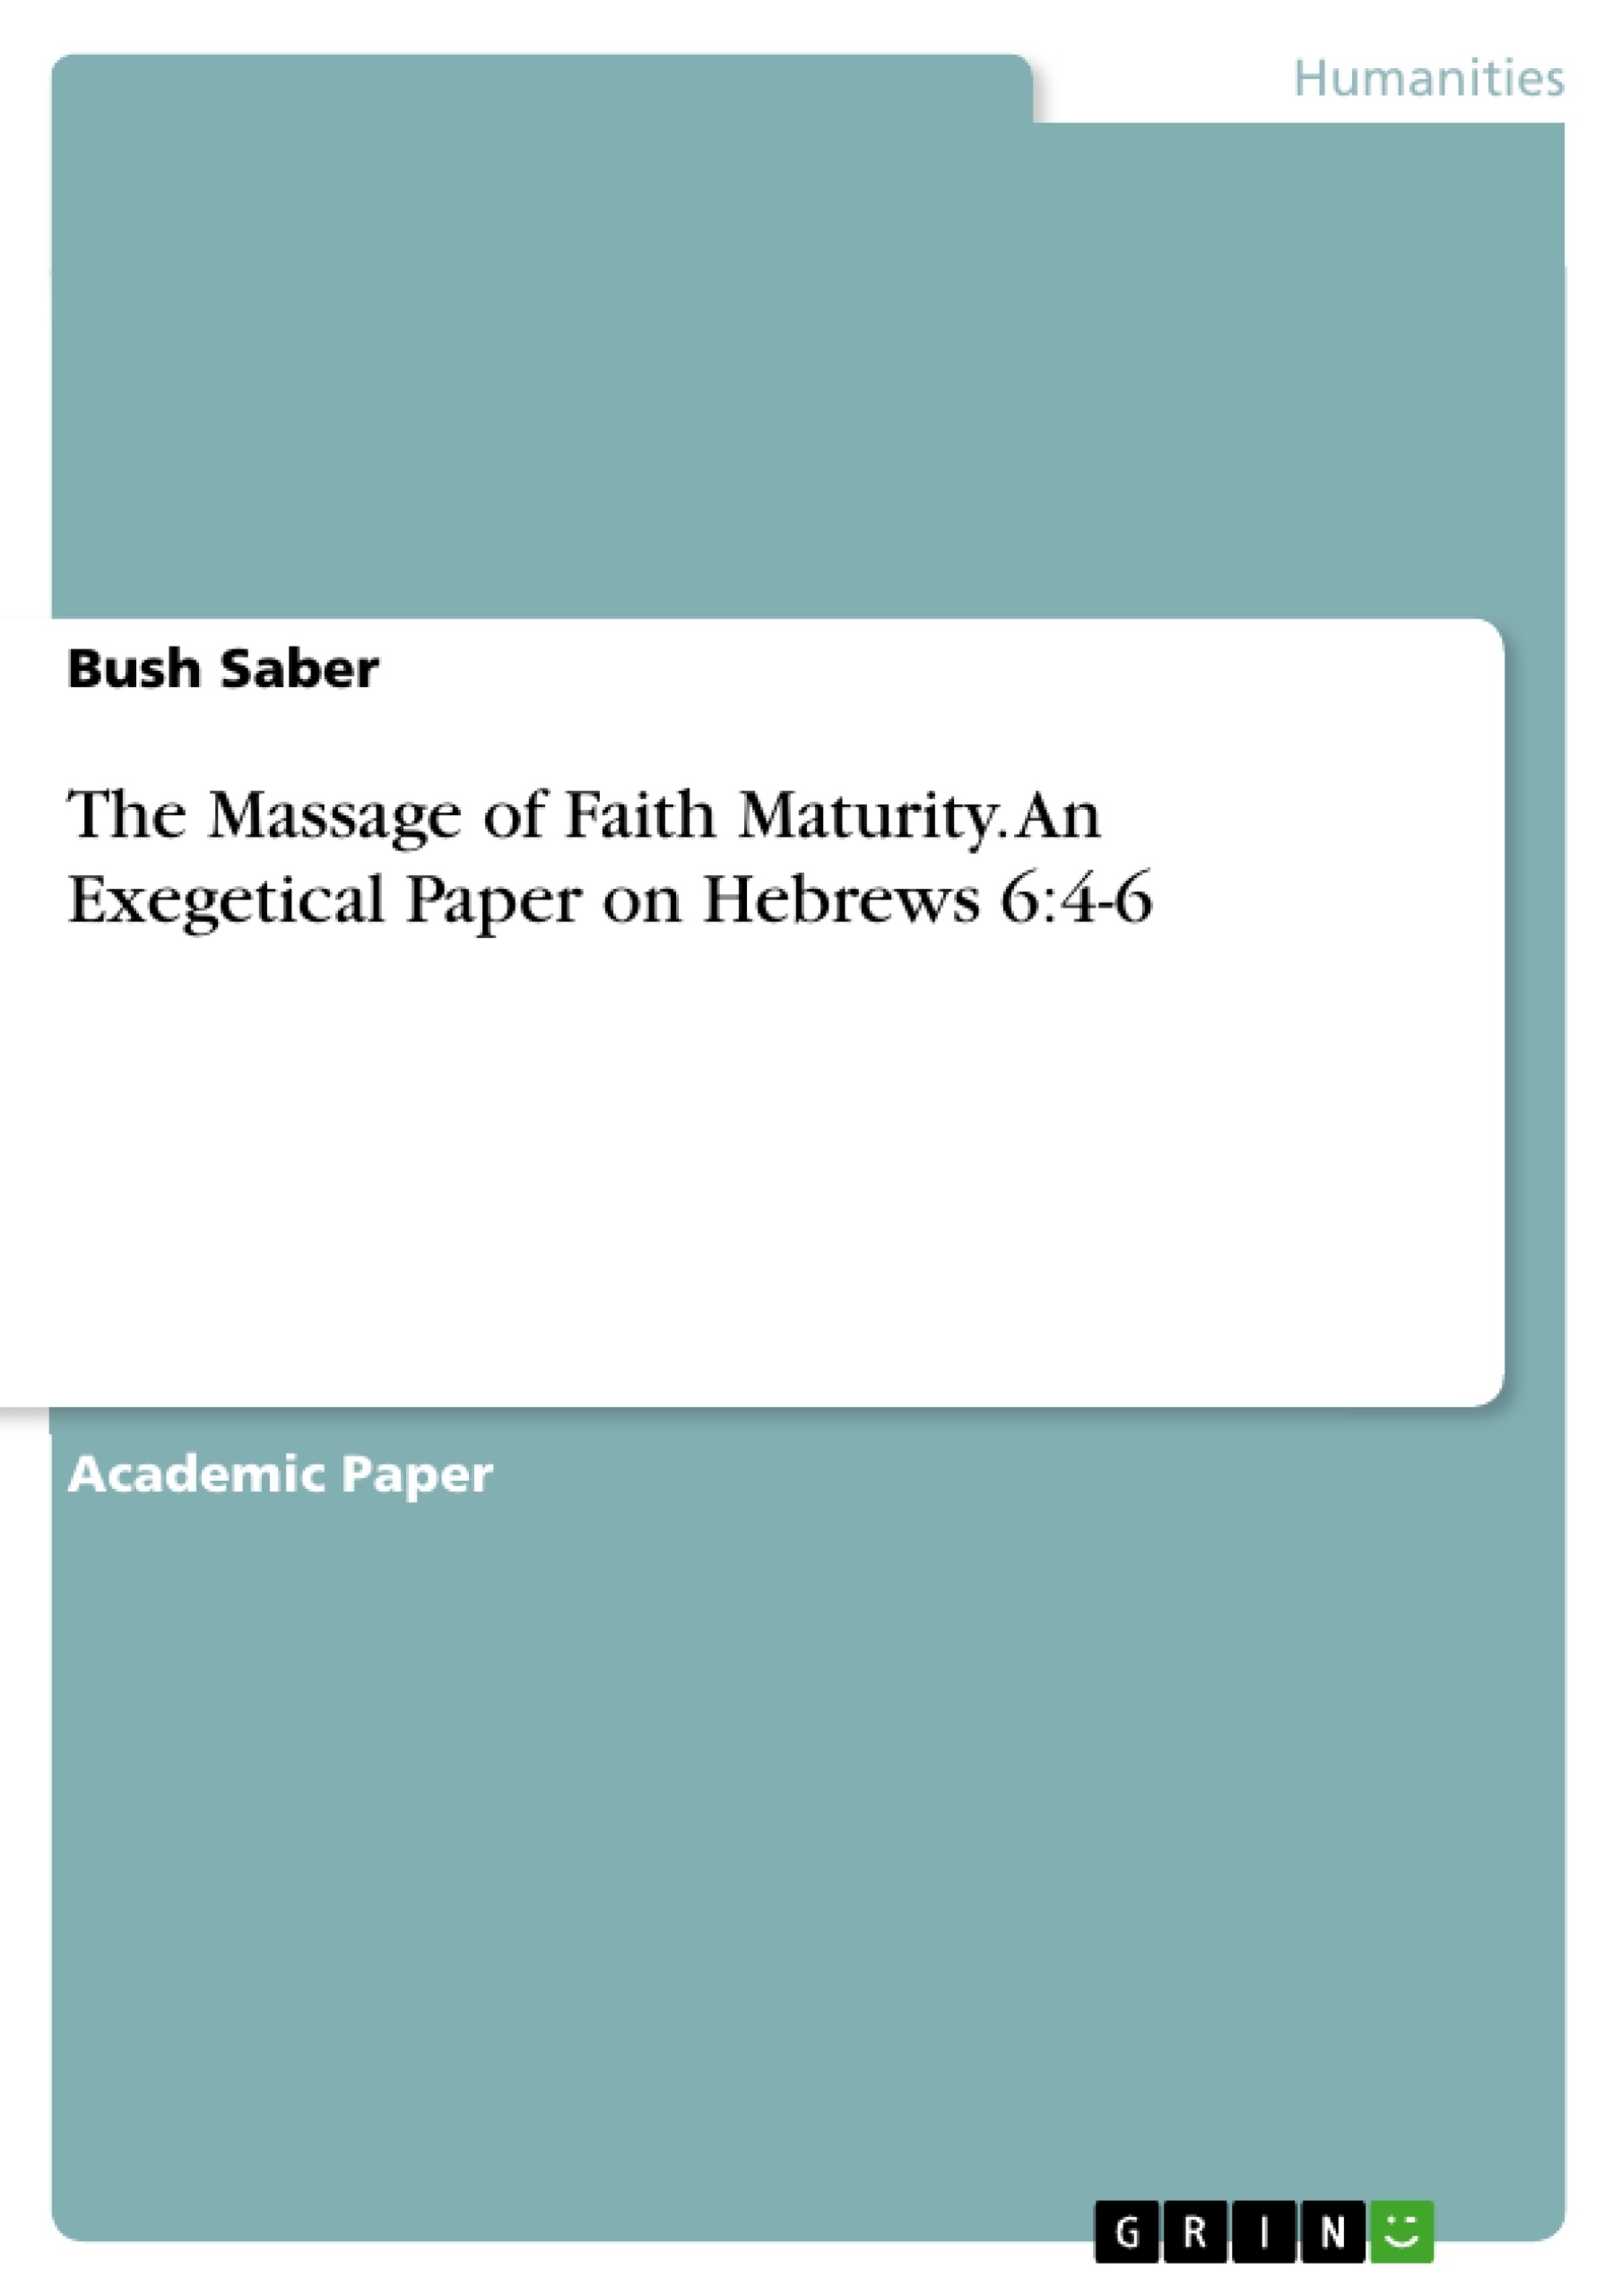 Title: The Massage of Faith Maturity. An Exegetical Paper on Hebrews 6:4-6